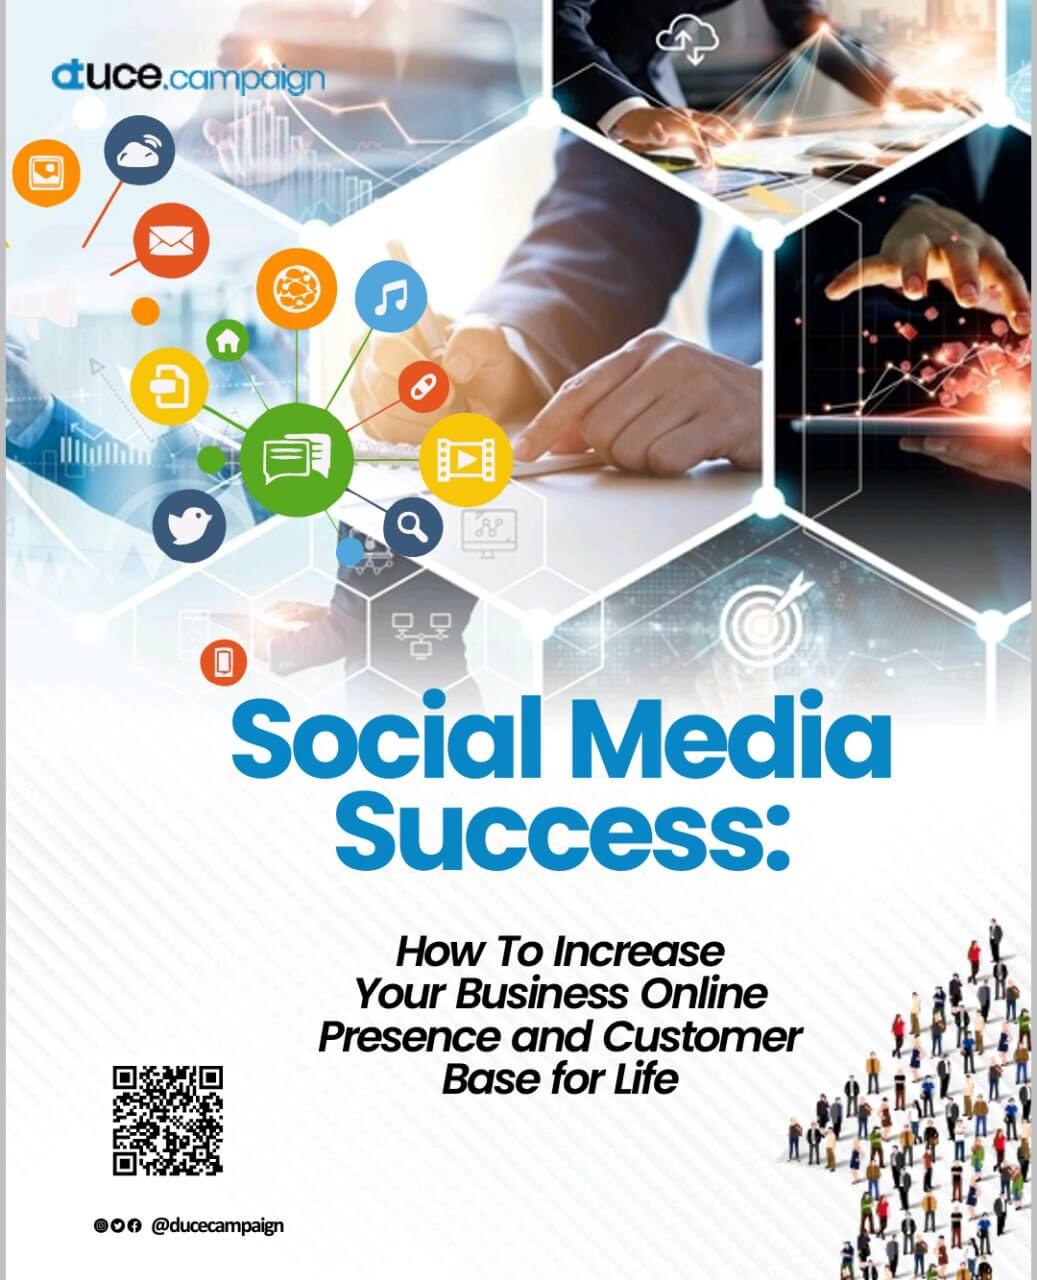 Social Media Sucess - How to Increase Your Business Online Presence and Customer Base for Life